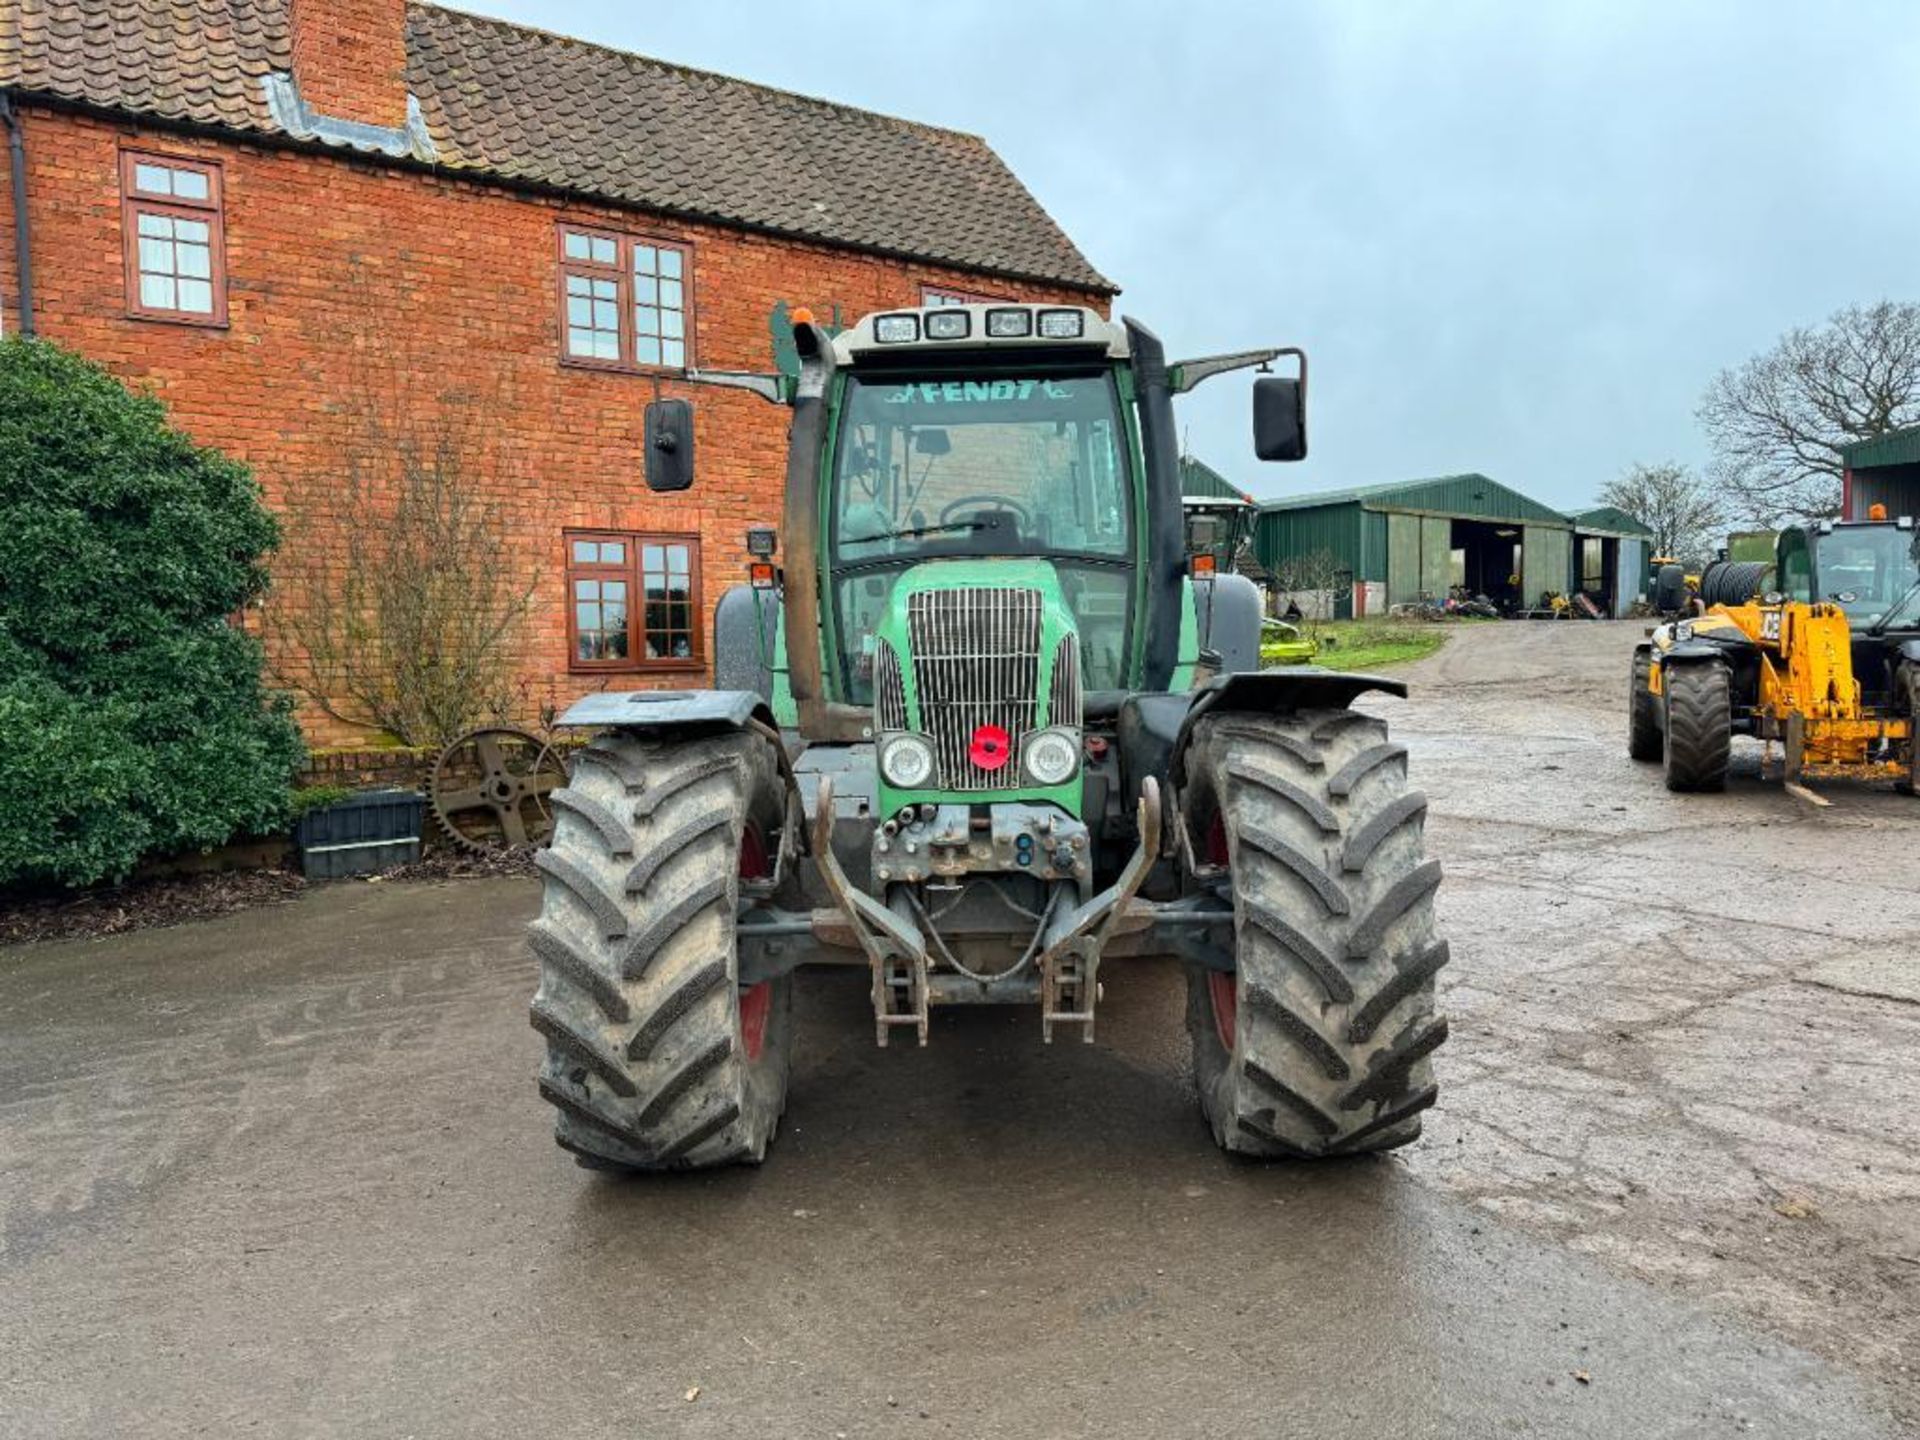 2001 Fendt 716 Vario 50kph 4wd tractor with 4 electric spools, air brakes and front linkage on BKT 5 - Image 21 of 22